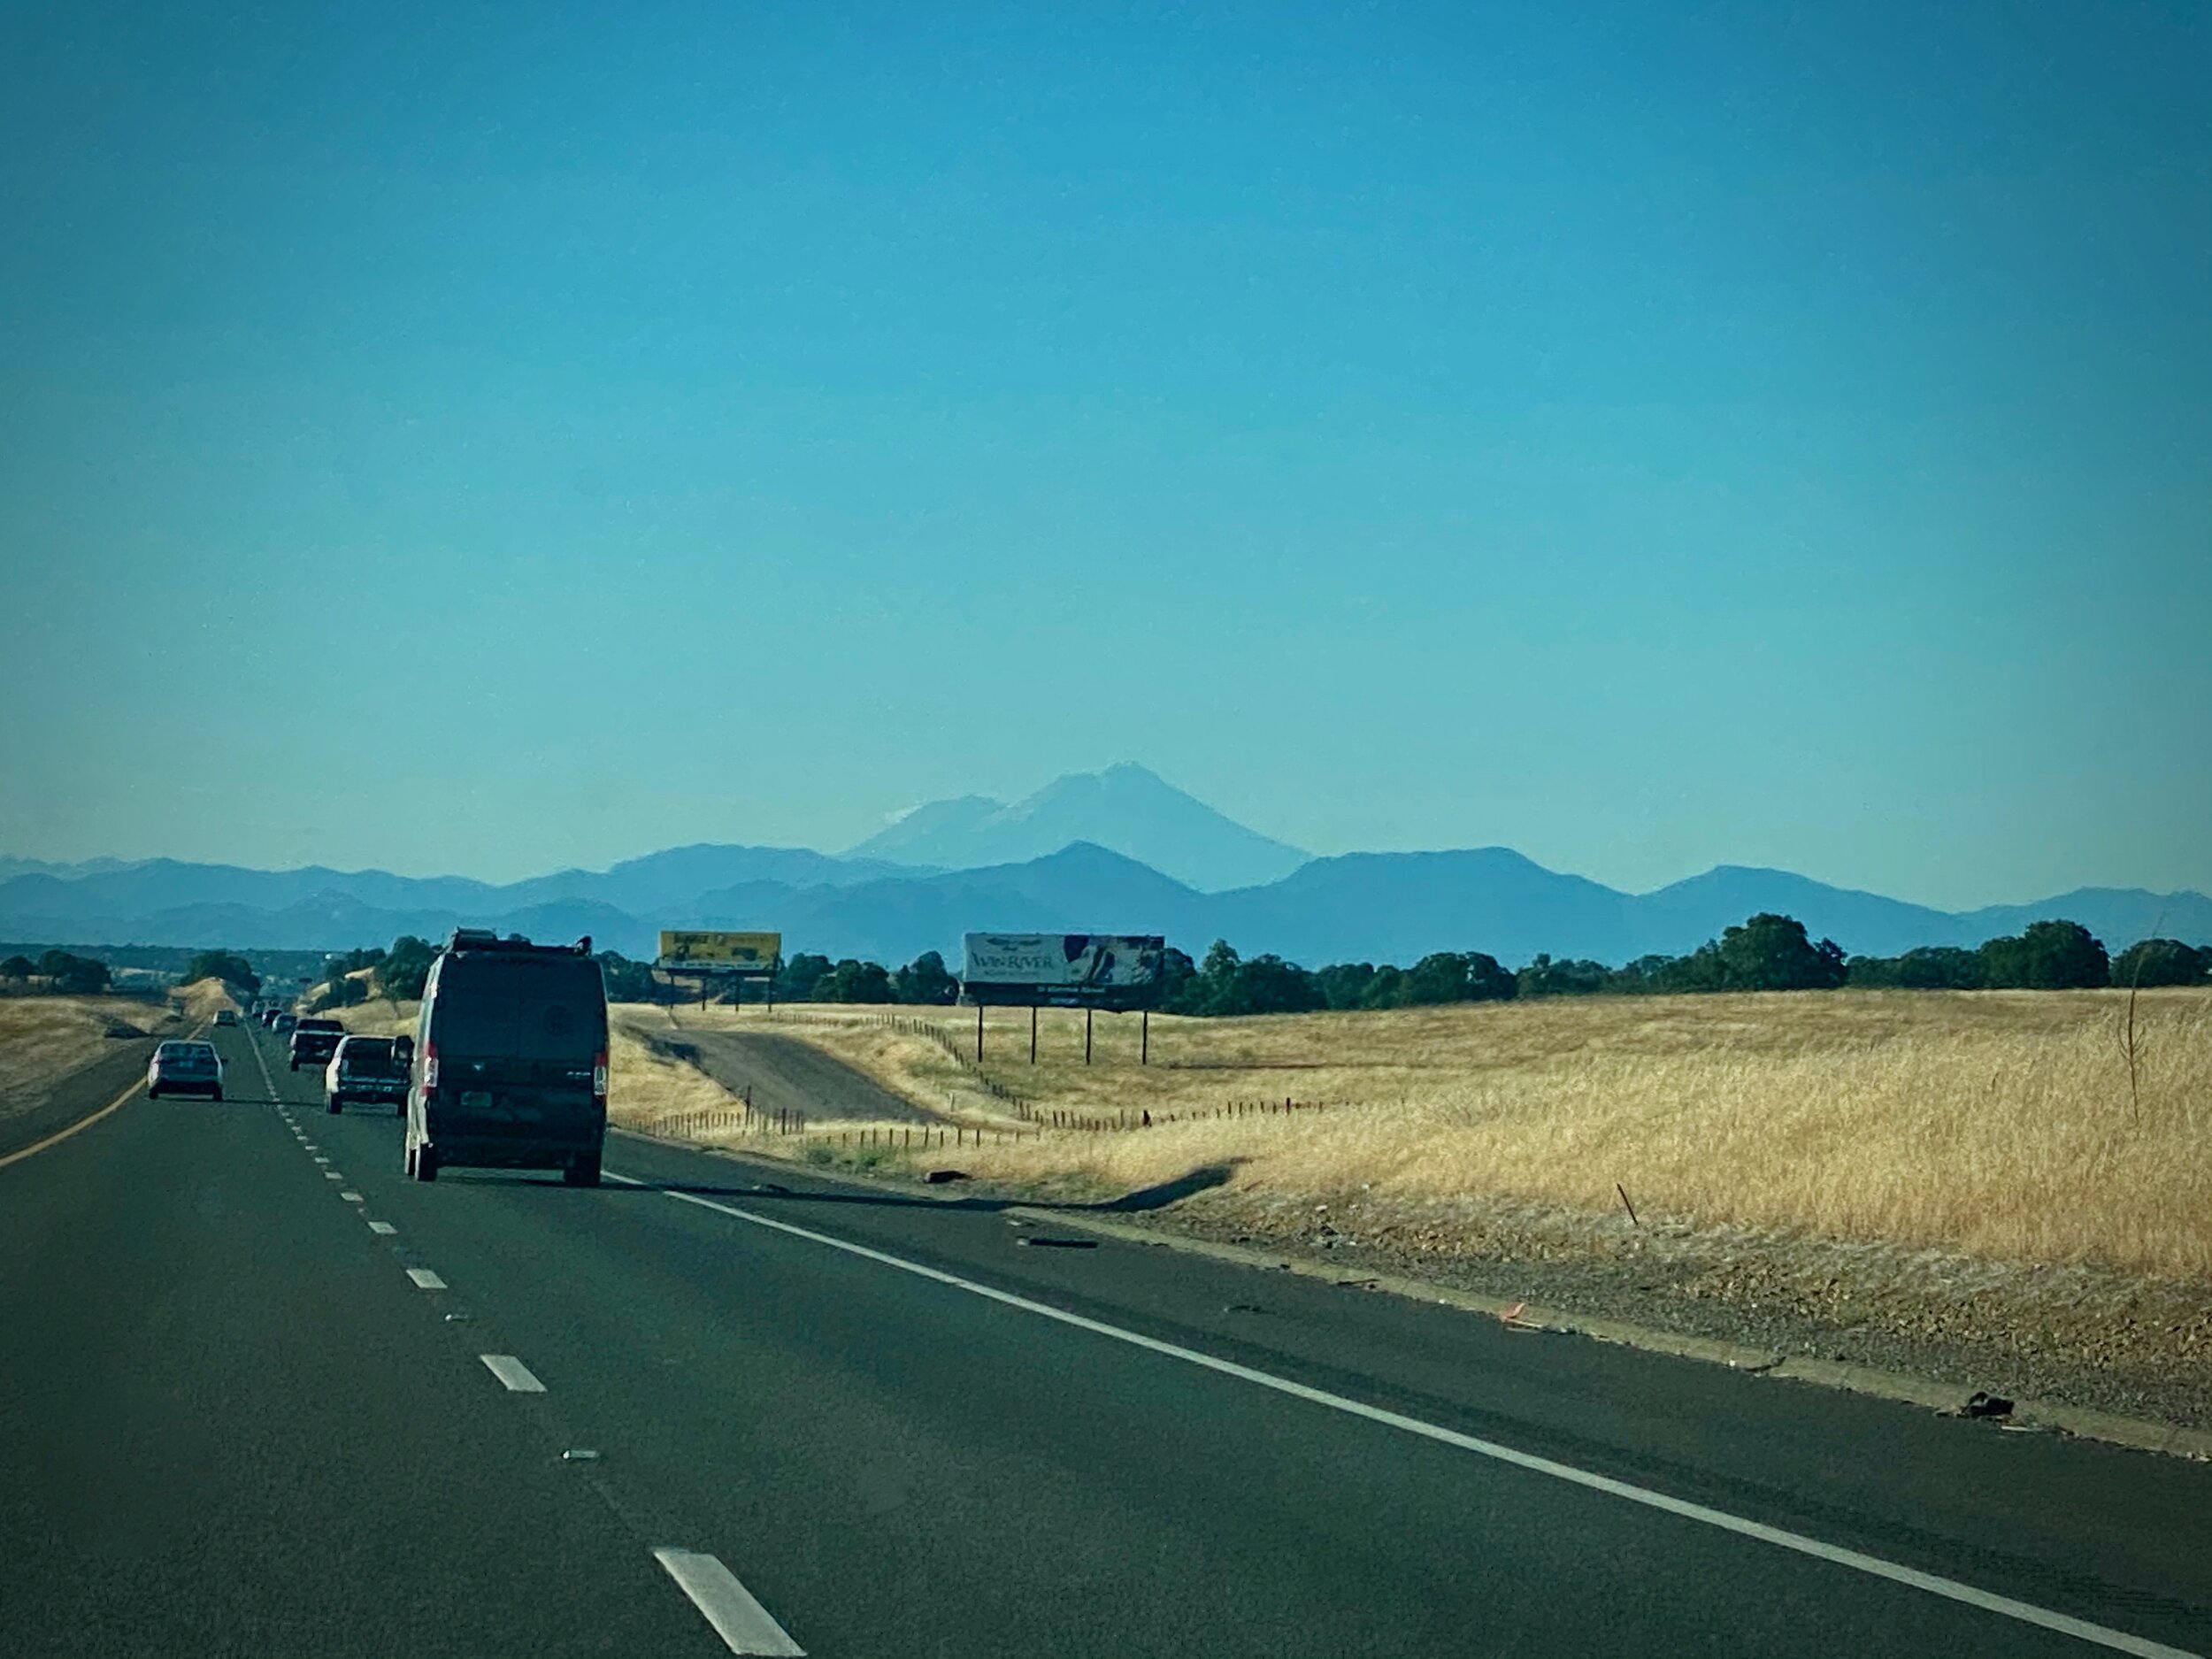 Mountain views on our way home from Chico to Redding, CA.  Photo by Karen Boudreaux, June 6, 2021